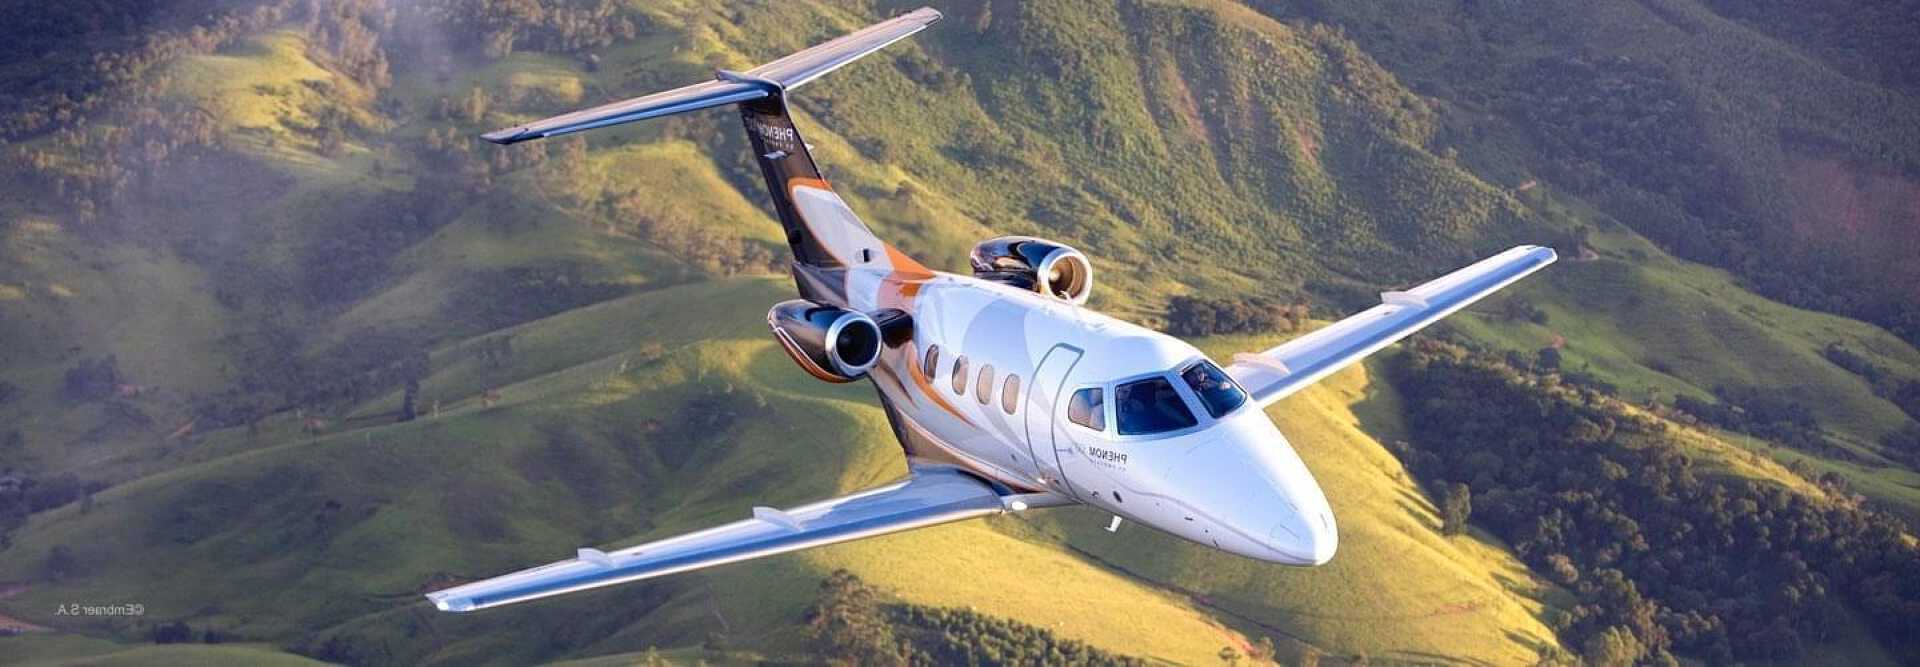 Very Light Jet Embraer Phenom 100 to charter for private aviation with LunaJets for intra-European short-haul flights or weekend getaways